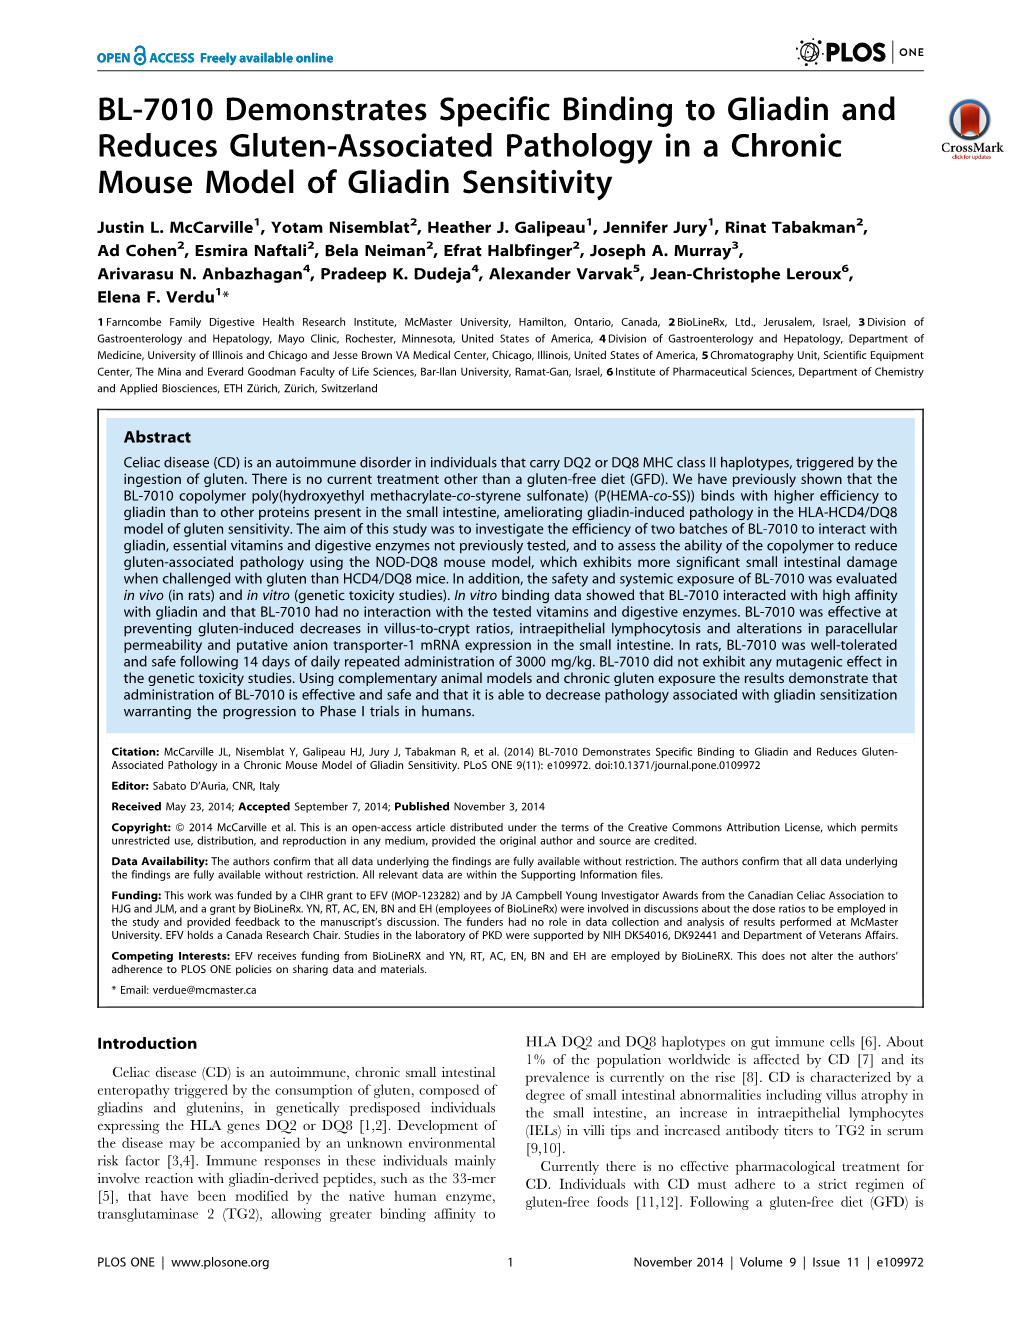 BL-7010 Demonstrates Specific Binding to Gliadin and Reduces Gluten-Associated Pathology in a Chronic Mouse Model of Gliadin Sensitivity